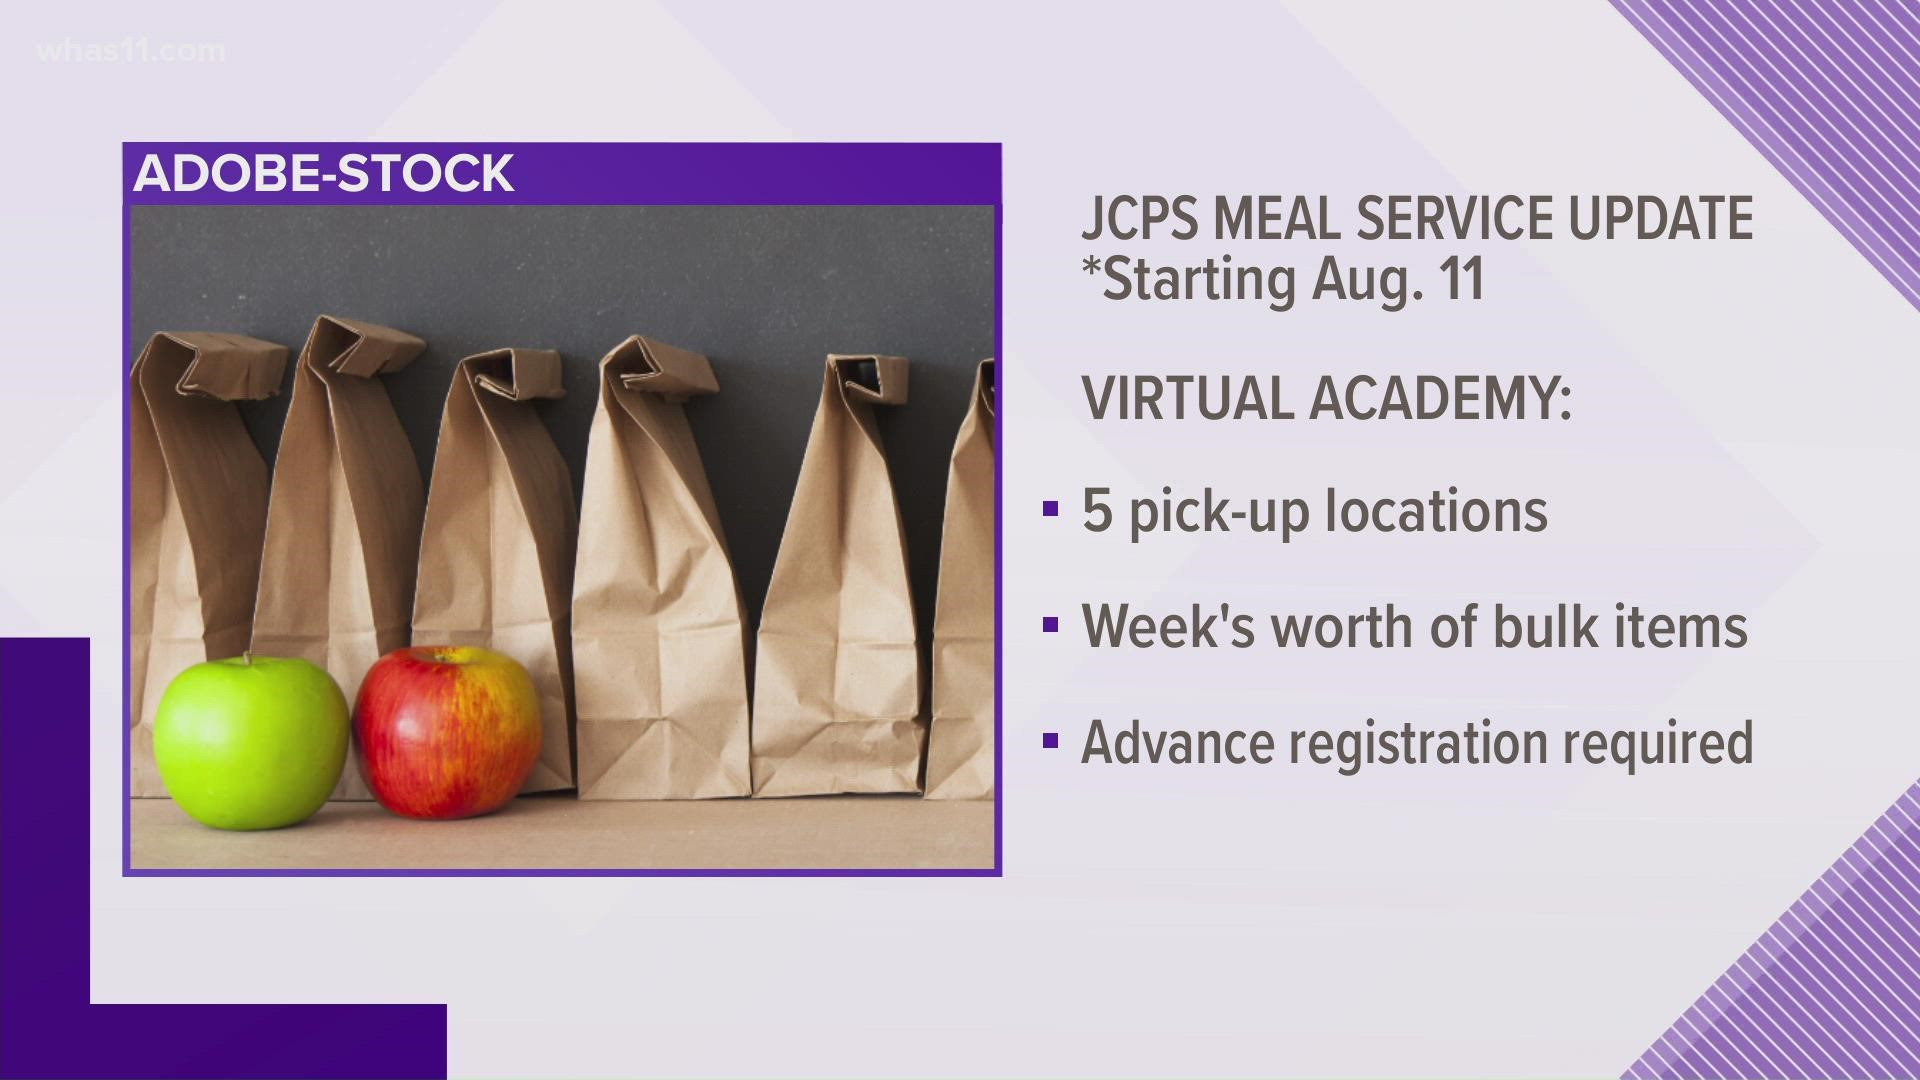 All students at Jefferson County Public Schools will be eligible for free meals during the 2021-22 school year, regardless of family income.